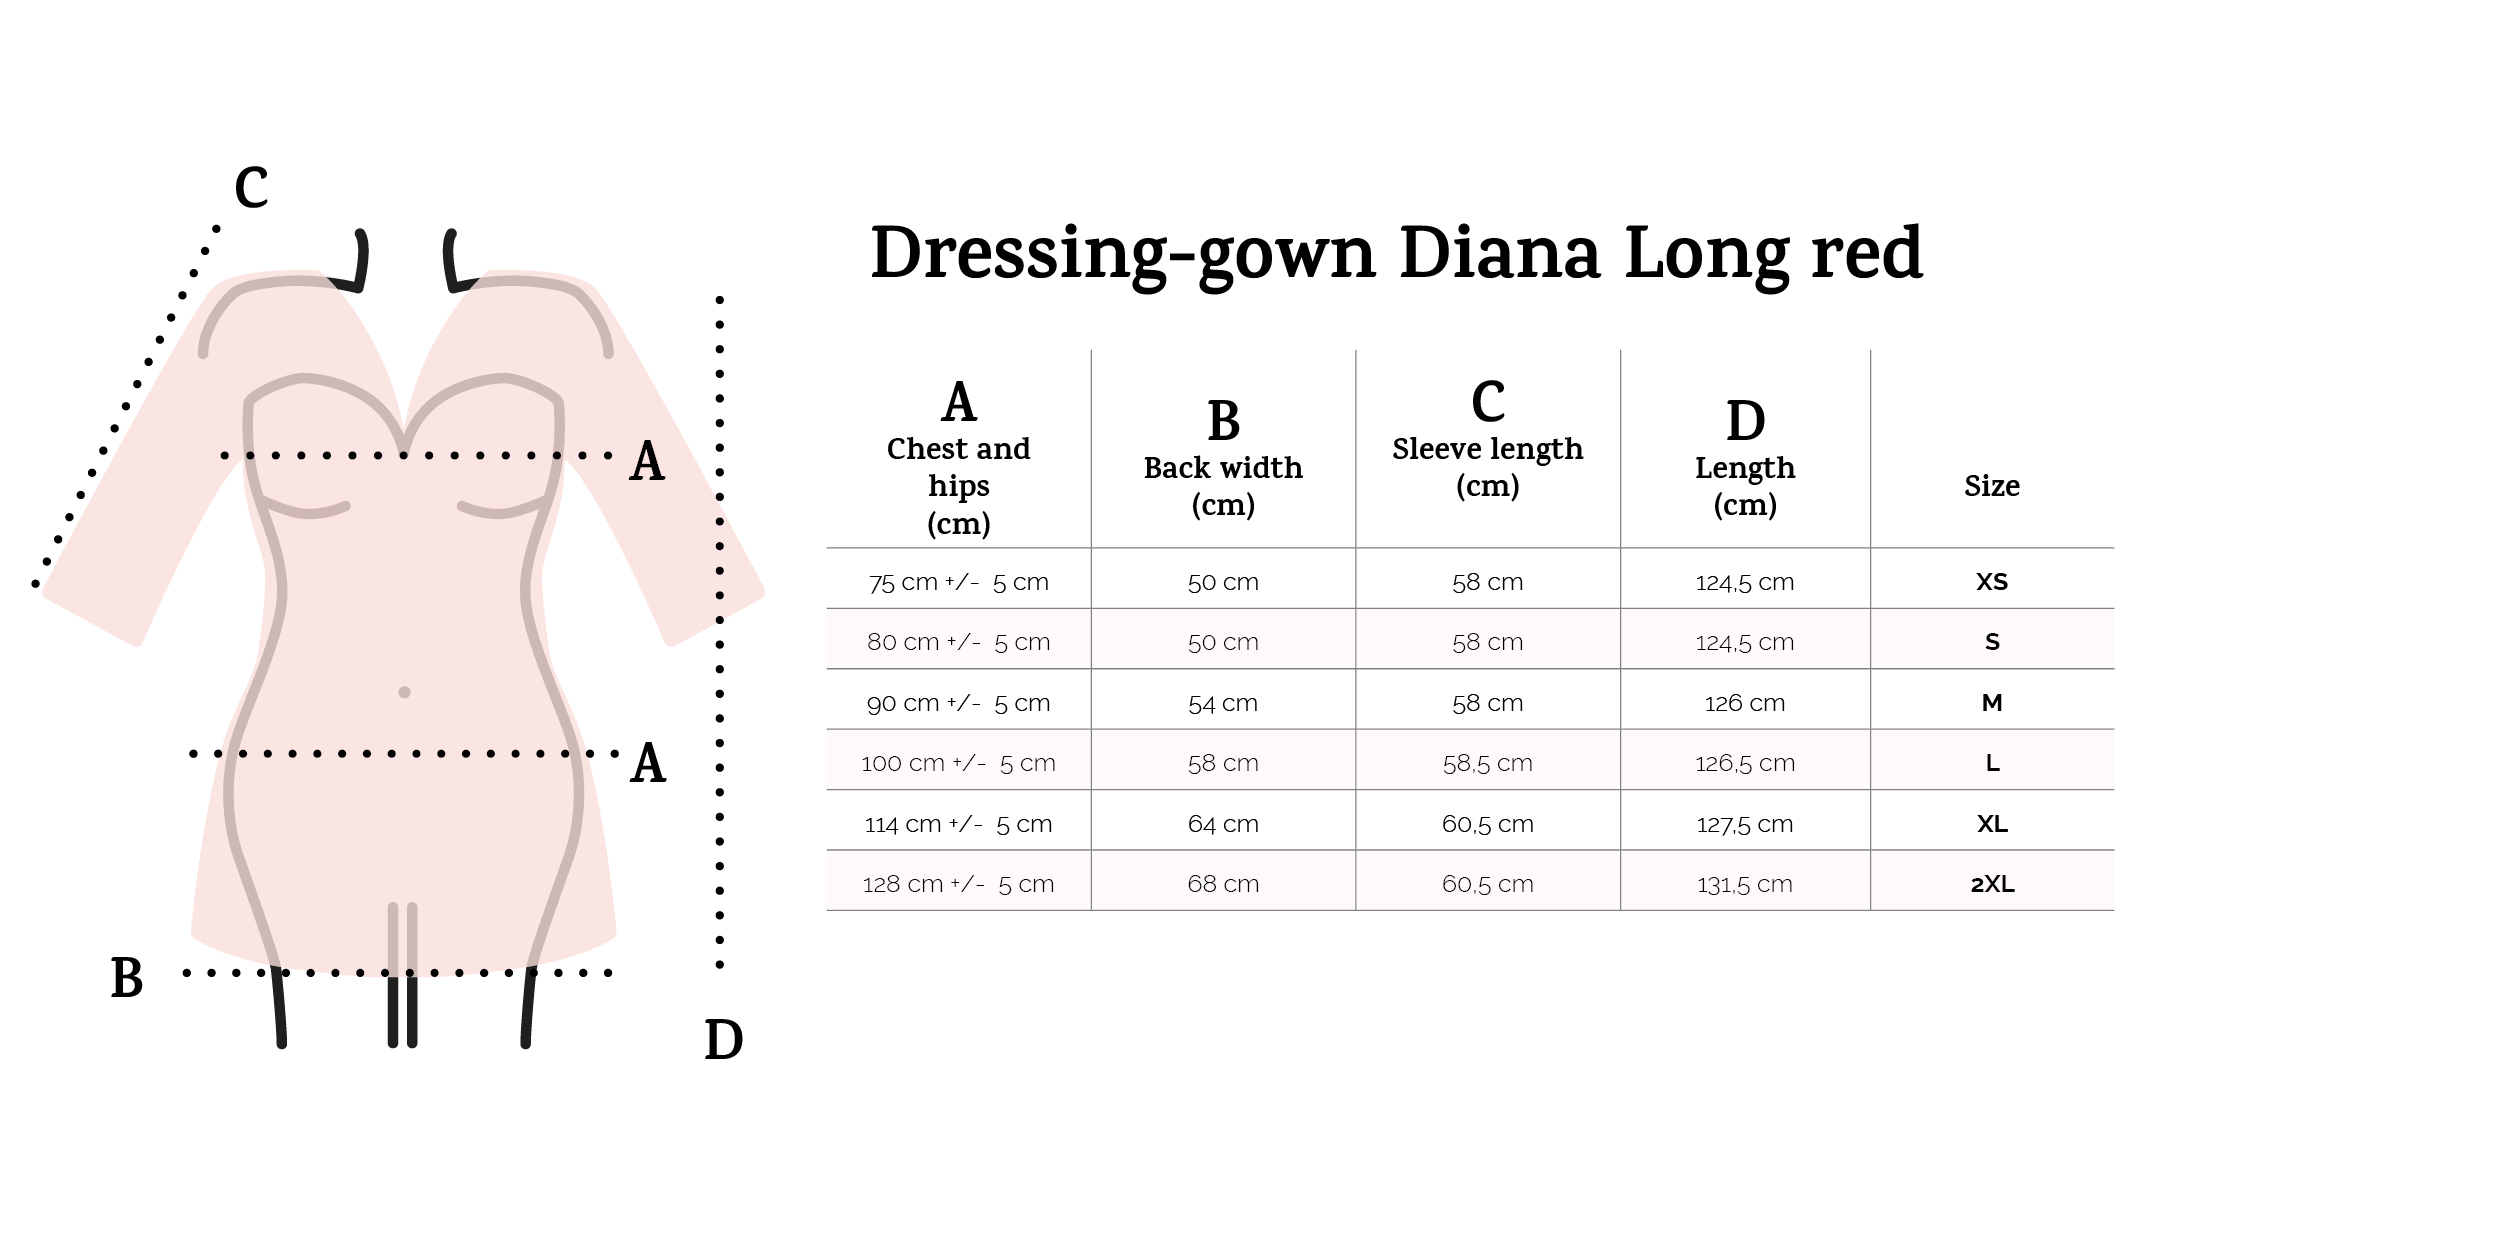 Dressing-gown Diana long red